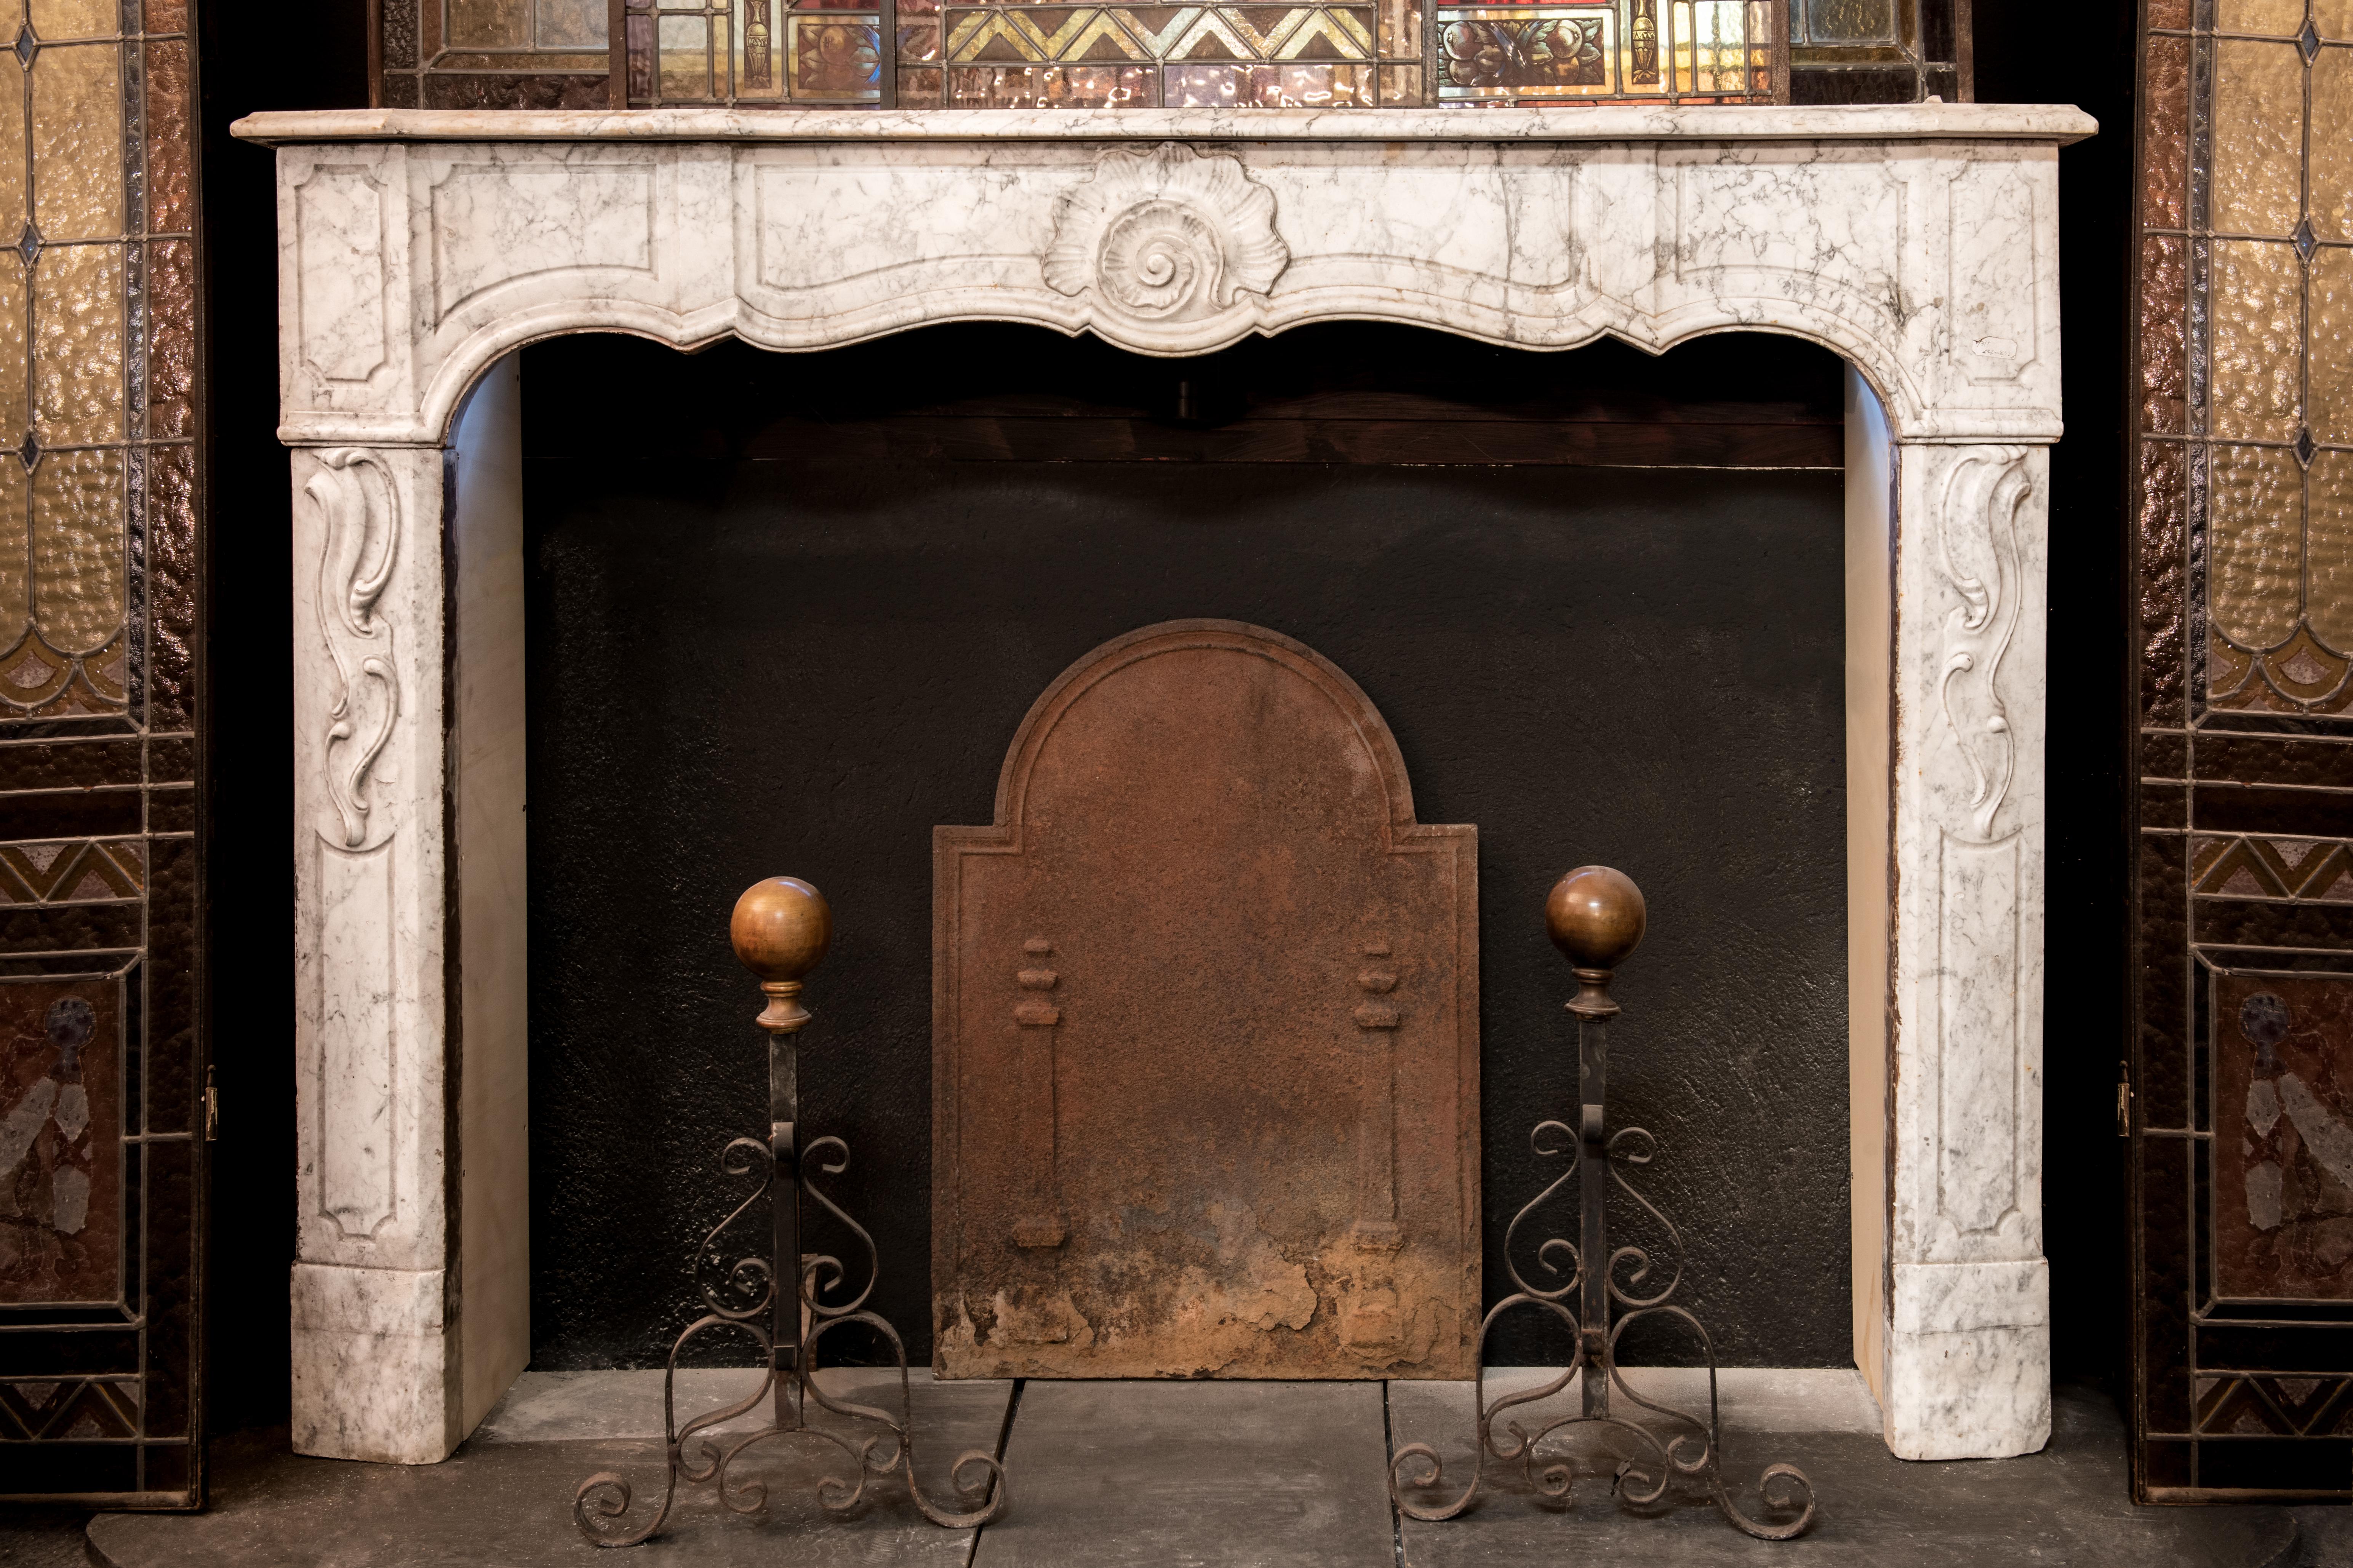 Antique fireplace in white Carrara marble, hand-carved mantle with central shell and decorations on the legs, built entirely by hand in Italy in the 1700s, from Genoa.
It has no sides because that part was originally made of bricks in the